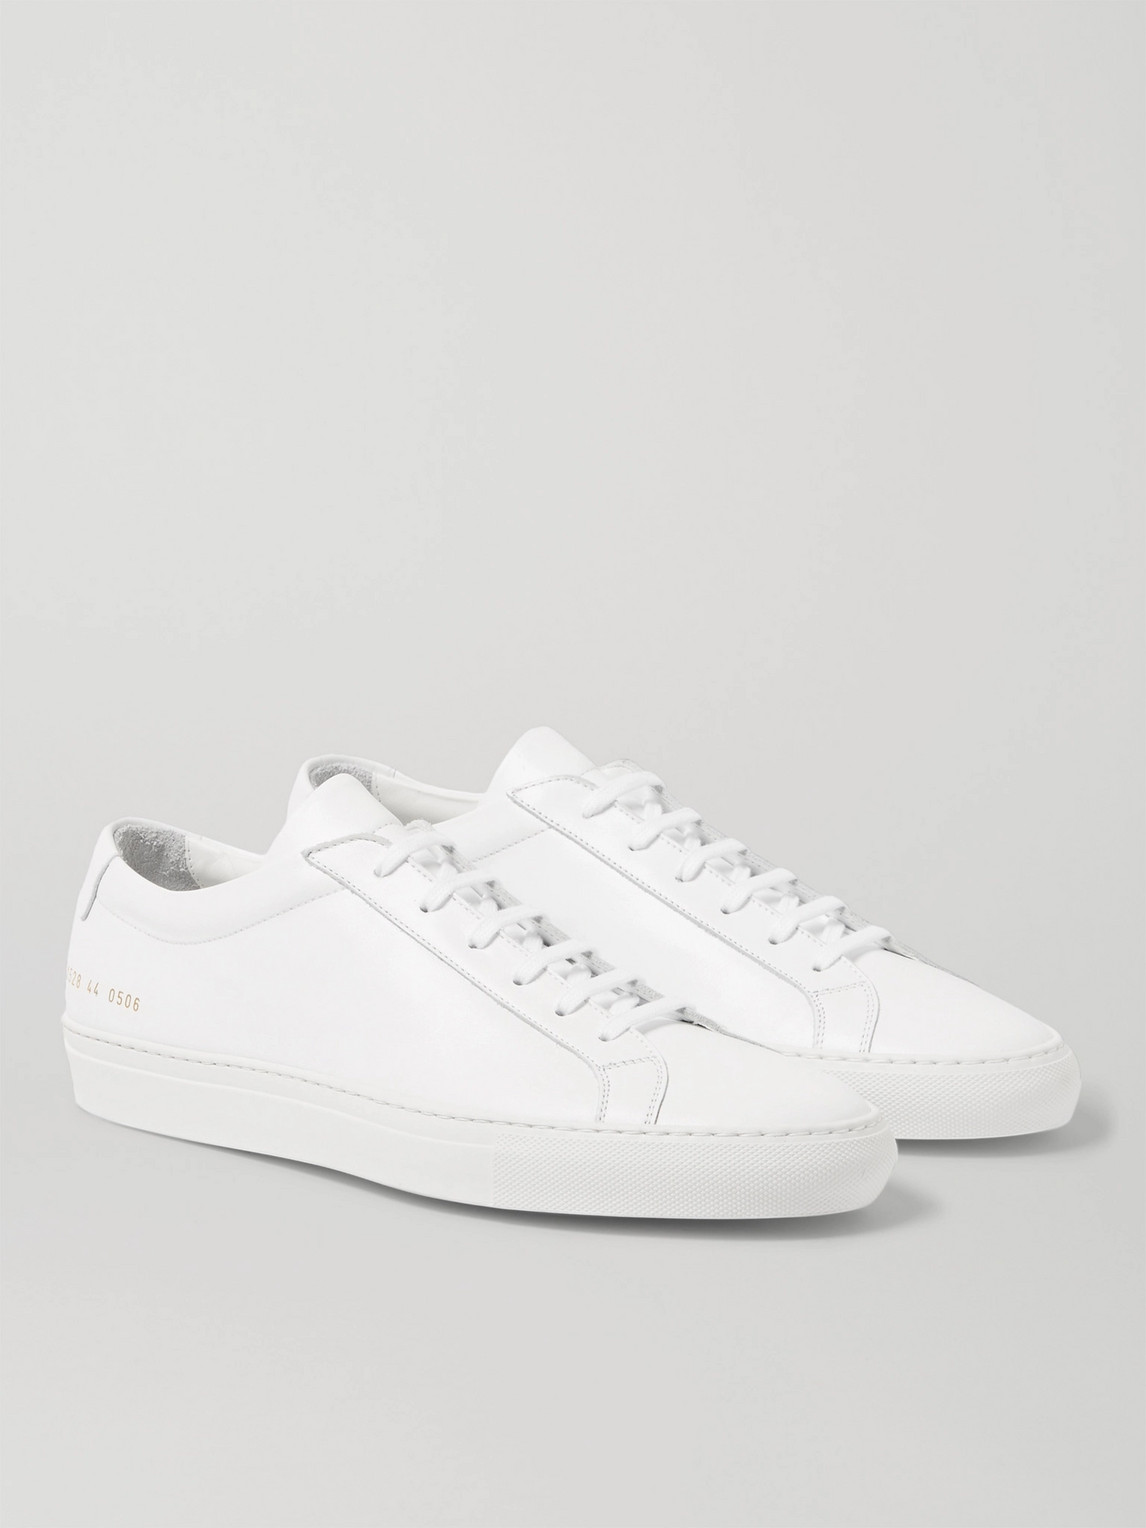 Shop Common Projects Original Achilles Leather Sneakers In White